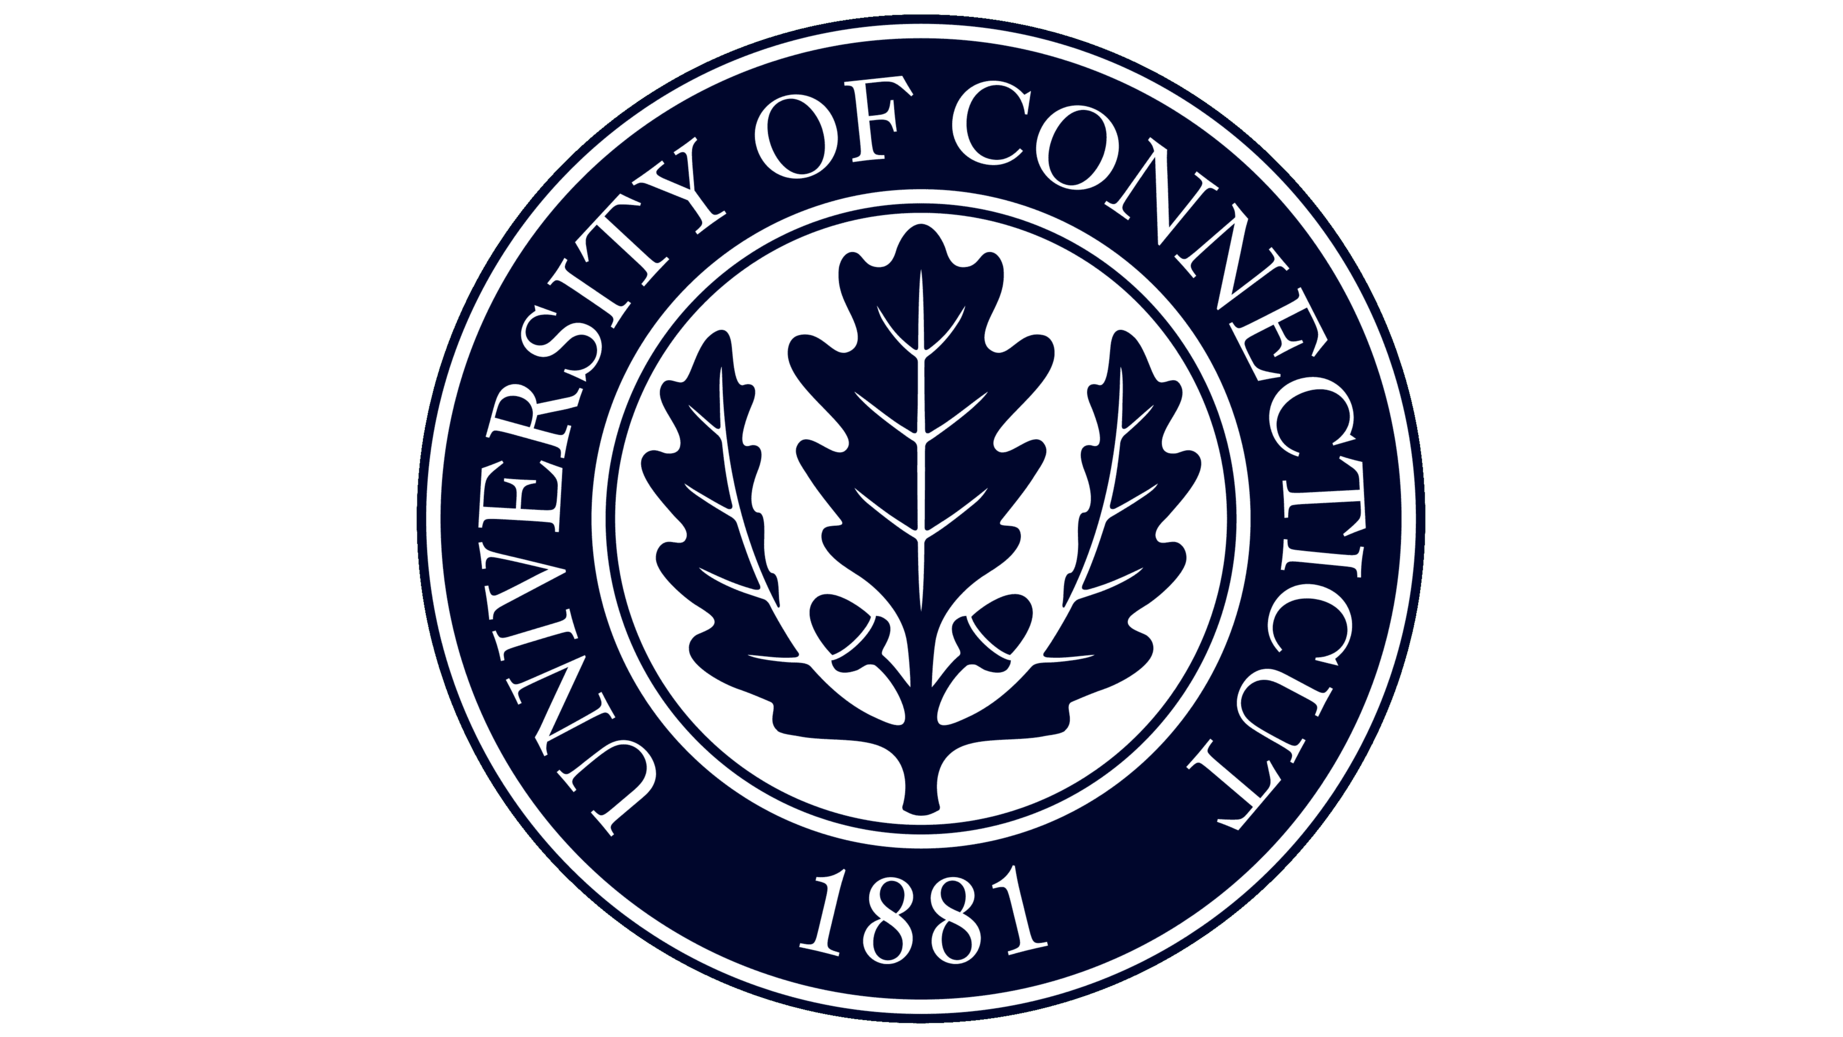 University of connecticut seal sign